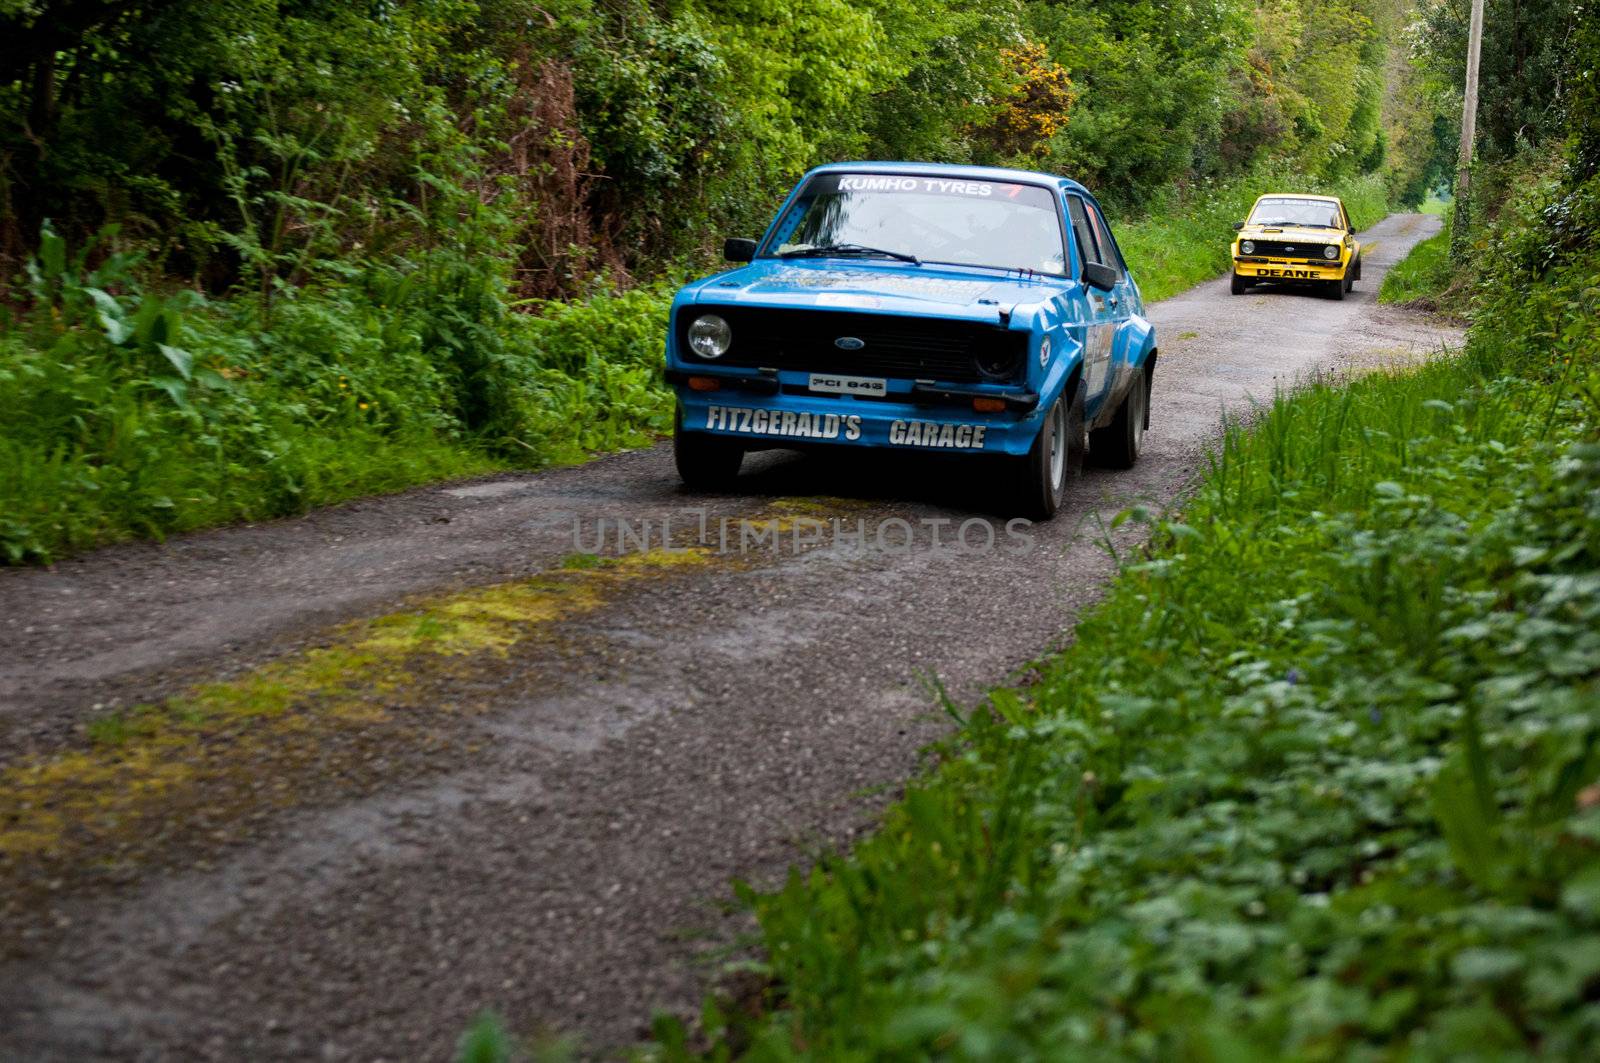 P. Fitzgerald driving Ford Escort by luissantos84